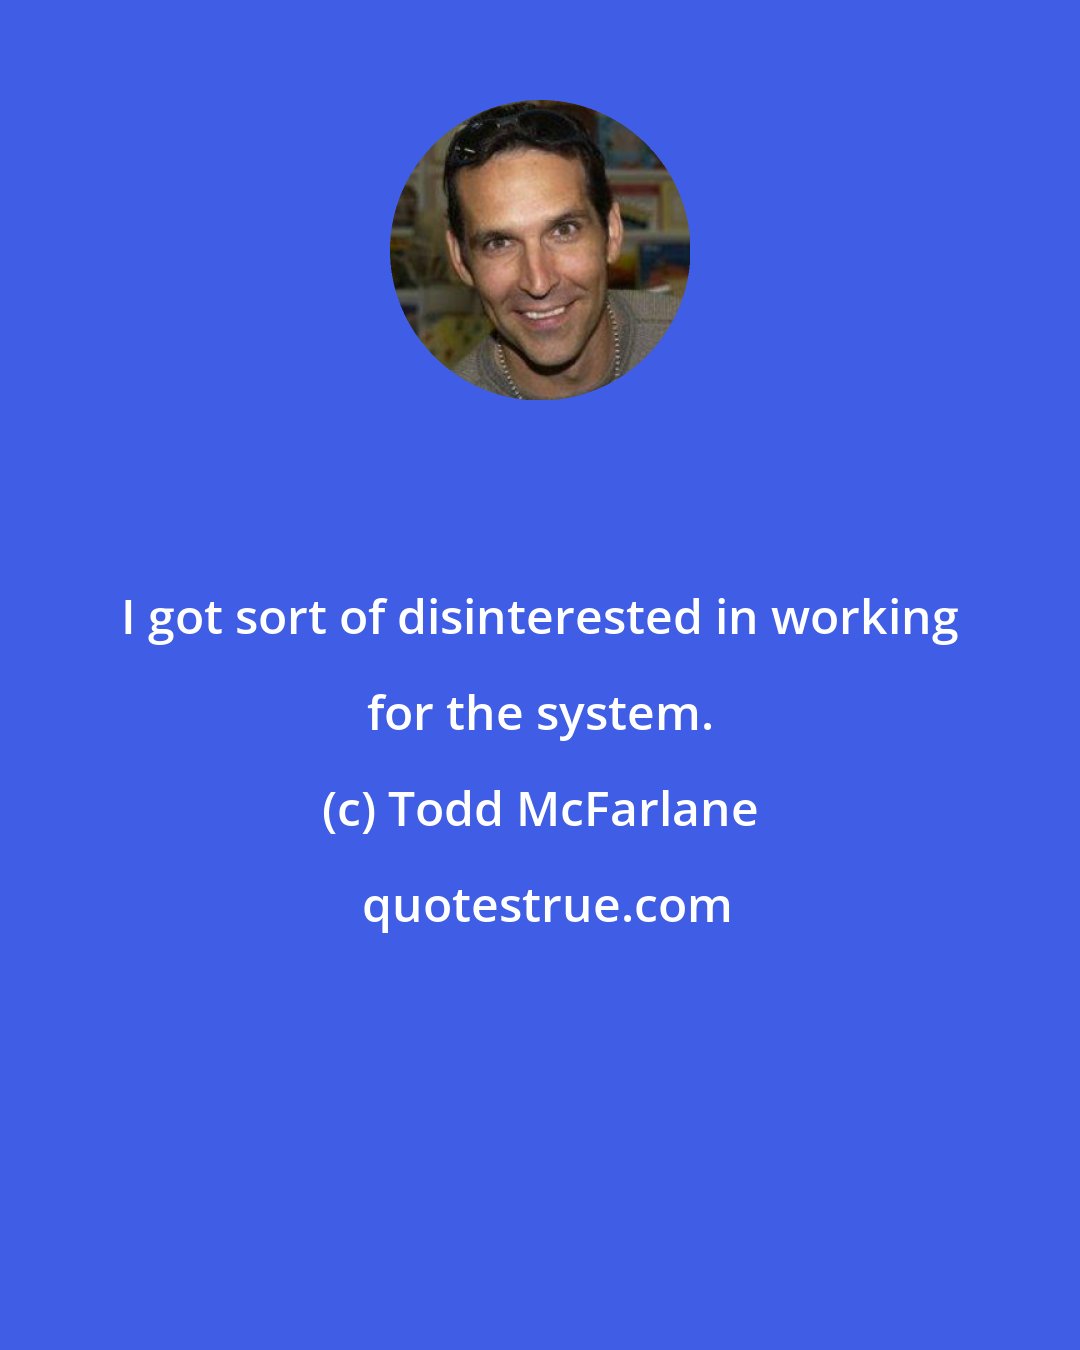 Todd McFarlane: I got sort of disinterested in working for the system.